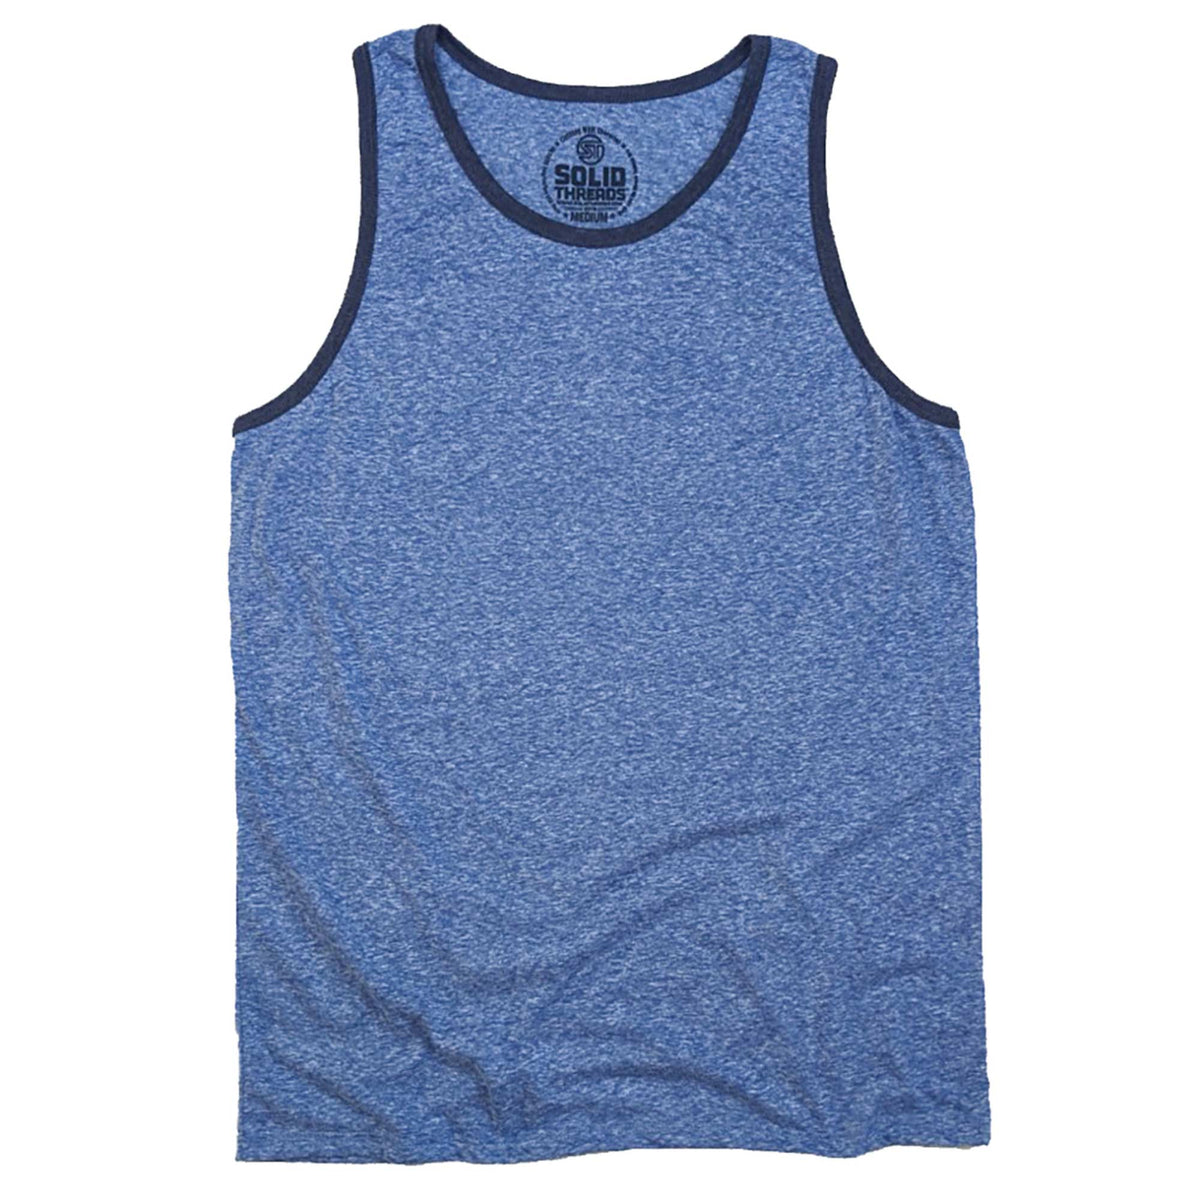 Men&#39;s Solid Threads Retro Ringer Tank Top Triblend Royal/Navy | Vintage Inspired USA Made Tank Top